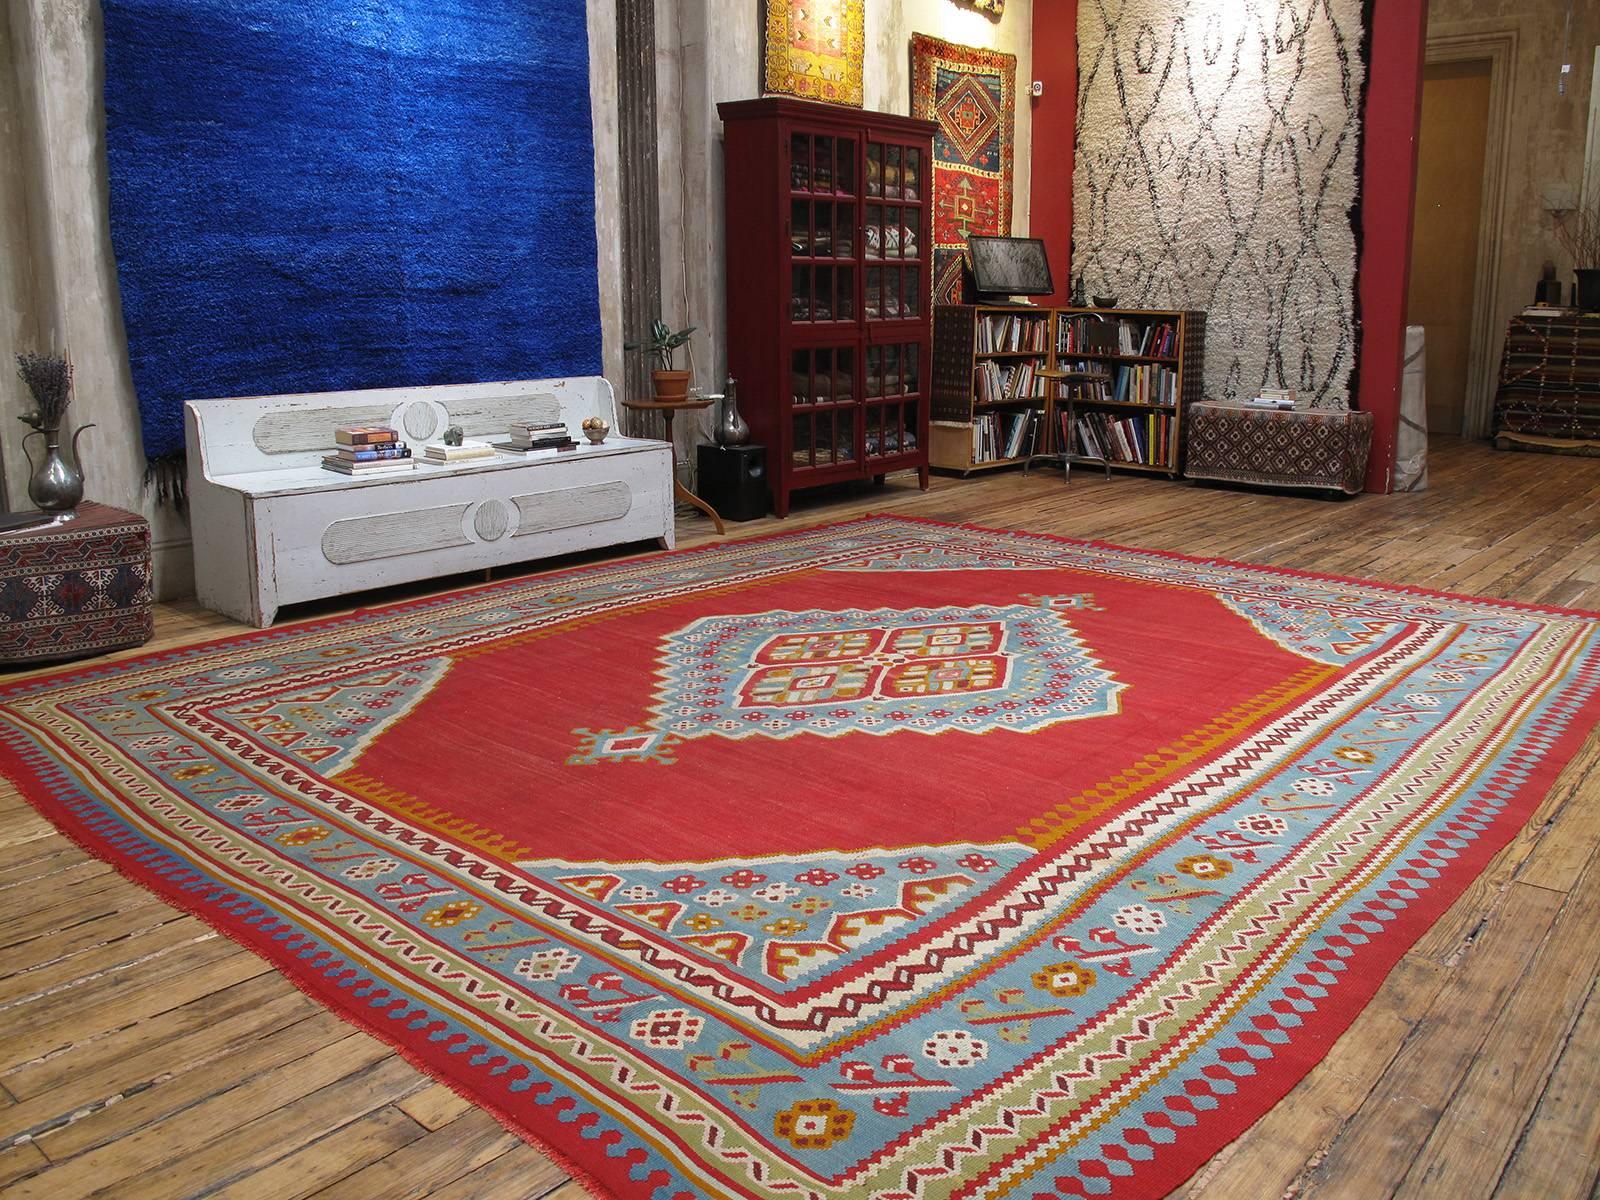 Large antique Oushak Kilim rug. A large format antique kilim rug, woven in the Oushak region of Western Turkey, displaying the classic central medallion design and color palette. Such kilims were contemporary with the many antique Oushak carpets